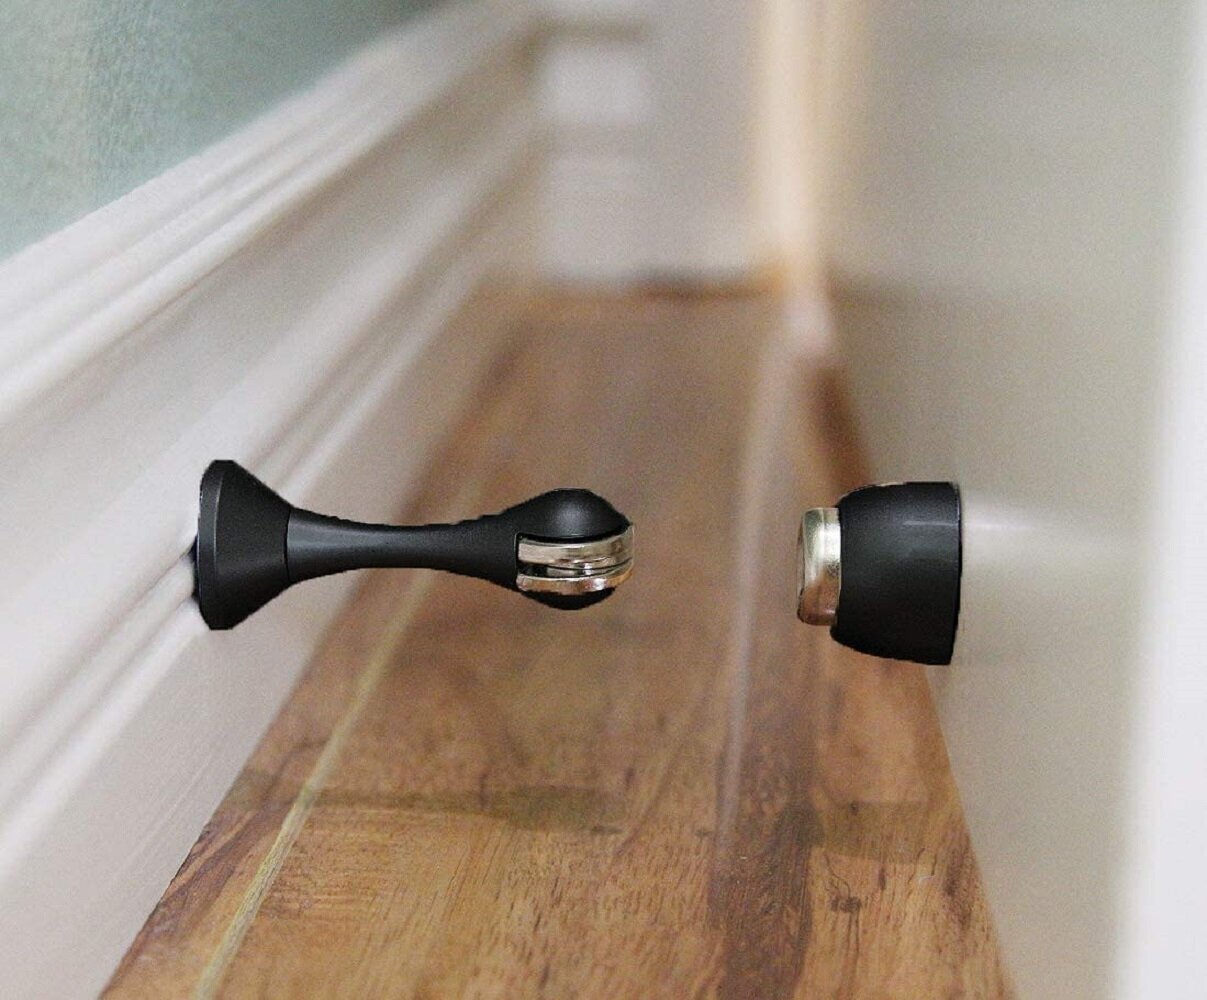 Ultra Quiet Magnetic Door Catch With Classic Ball and Cup Magnet 